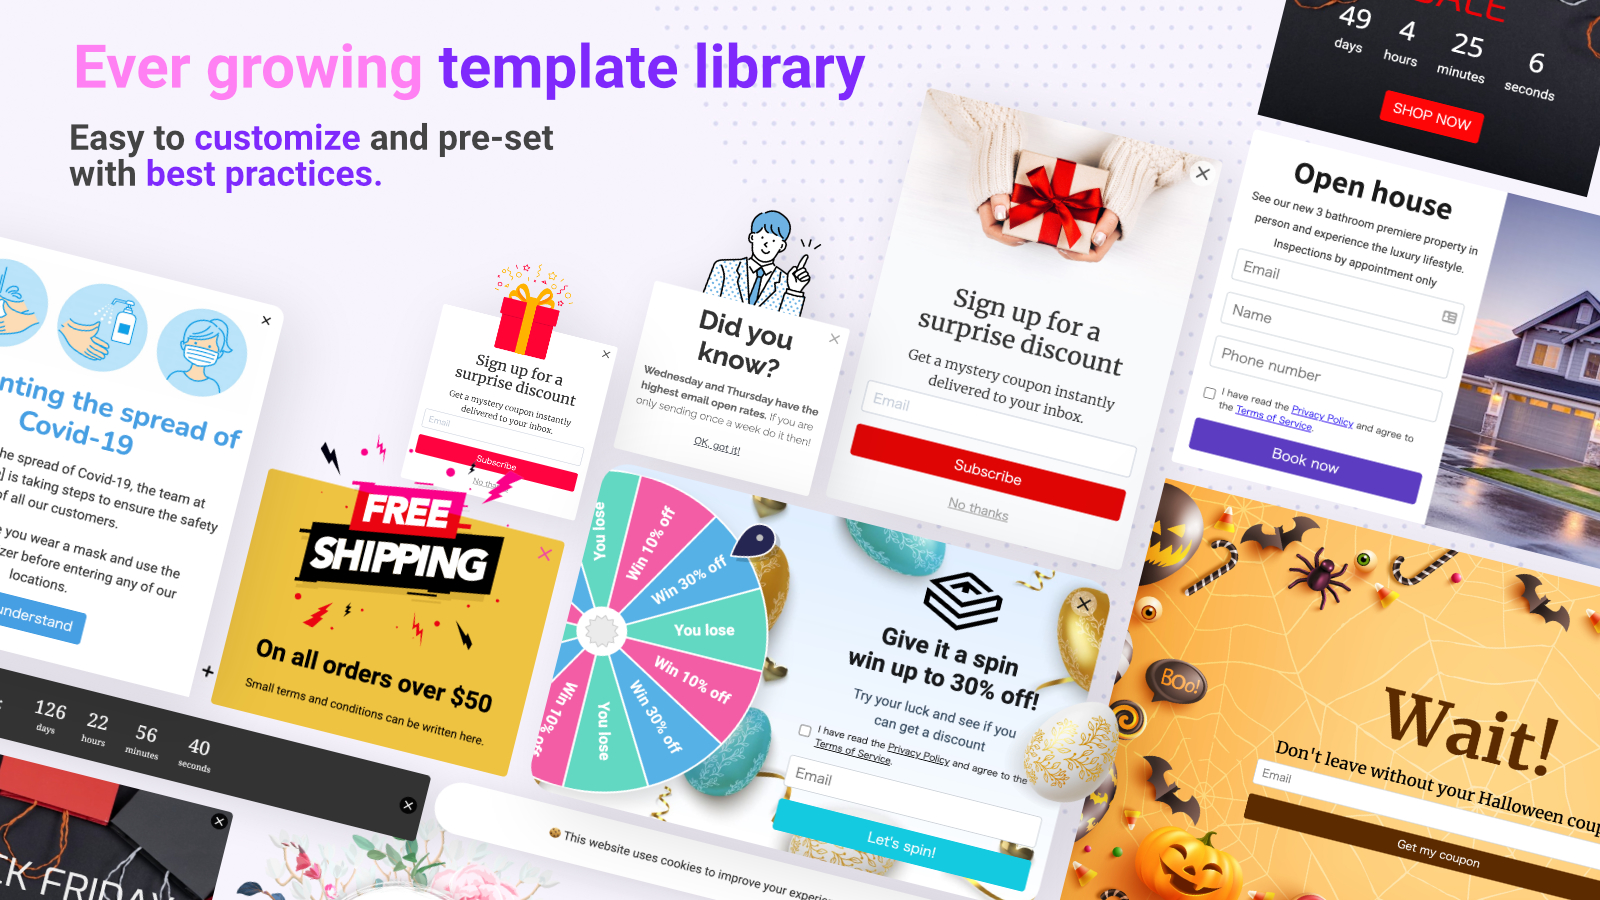 Promolayer Over 350 templates to make getting started easy